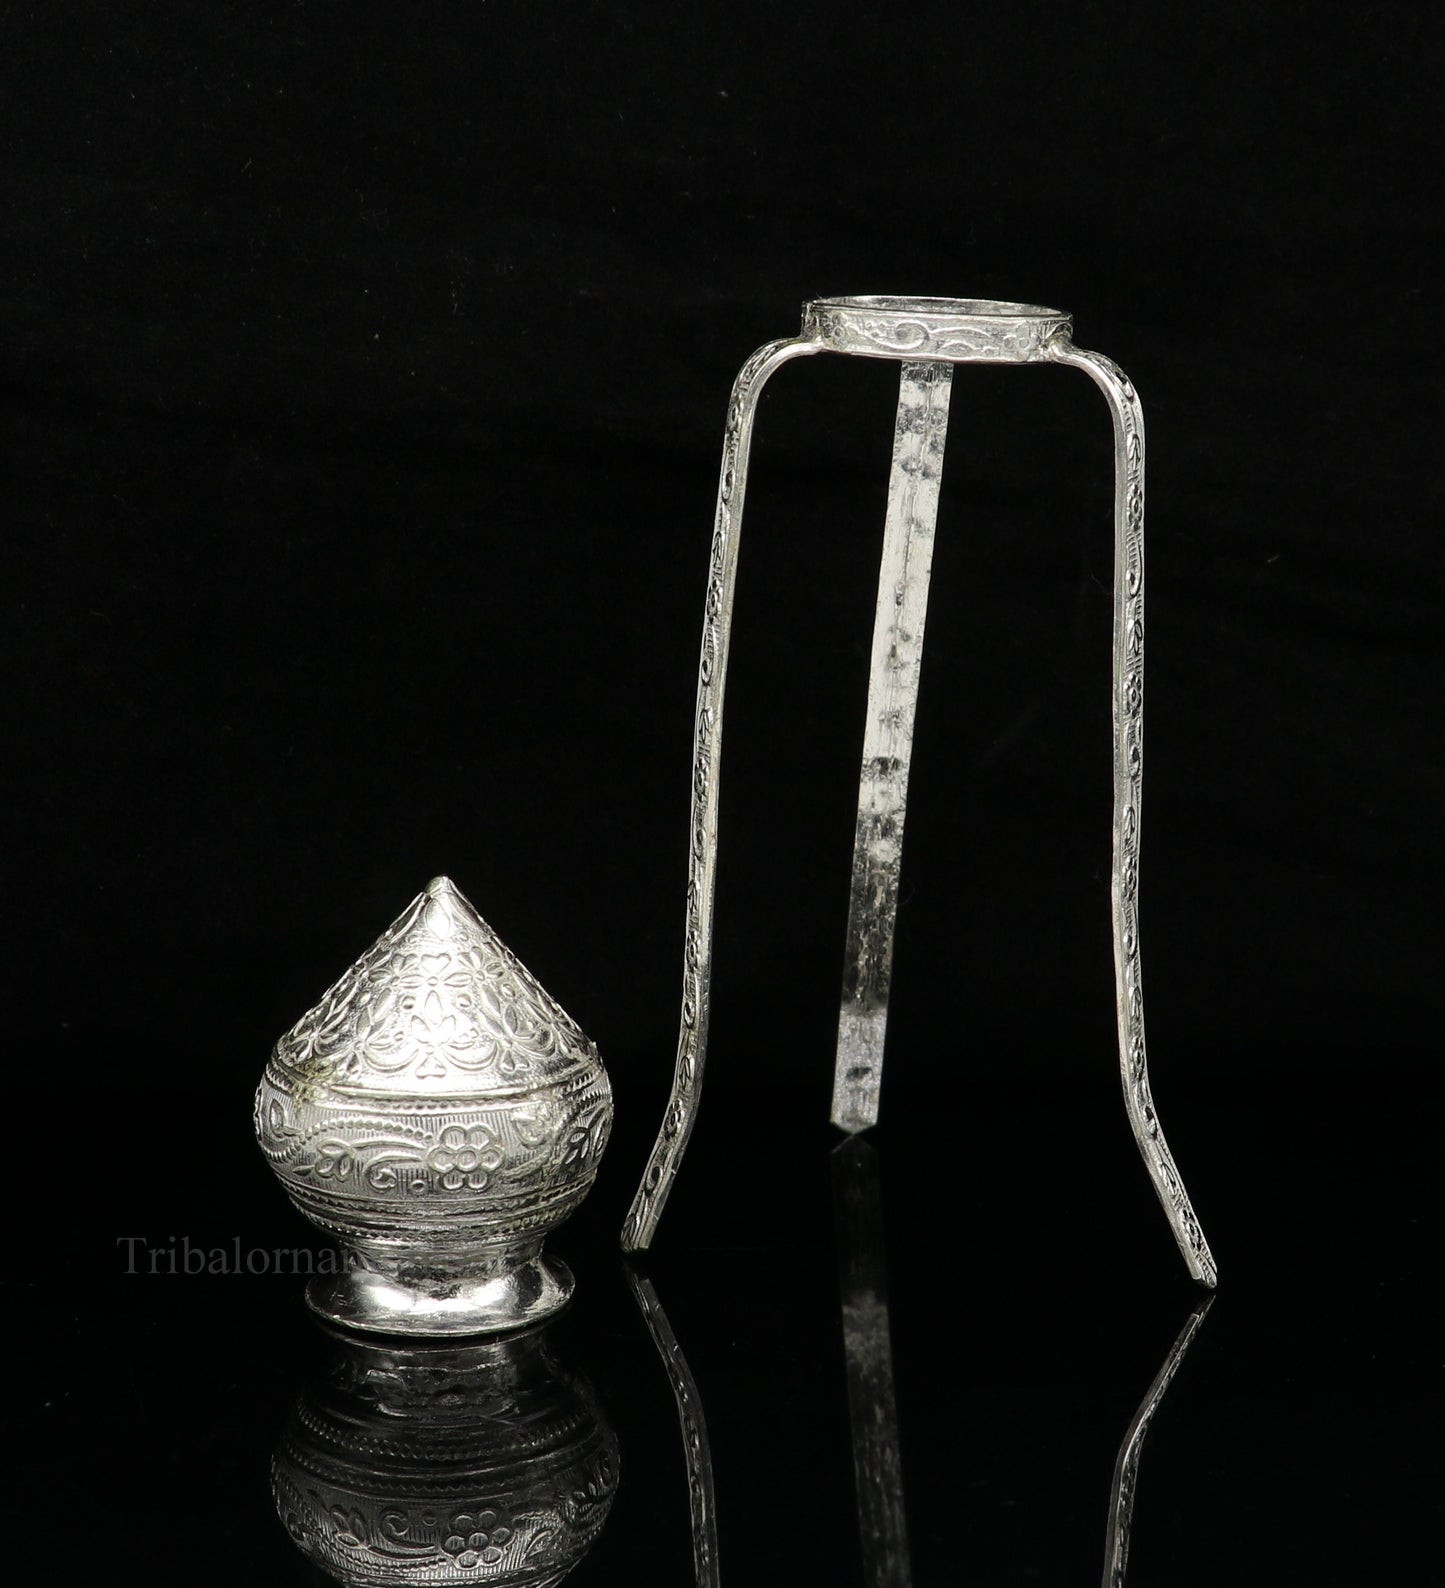 925 sterling silver handmade God shiva lingam water flow pot or puja kalas for Abhishek of lingam, best worshipping article from india su492 - TRIBAL ORNAMENTS